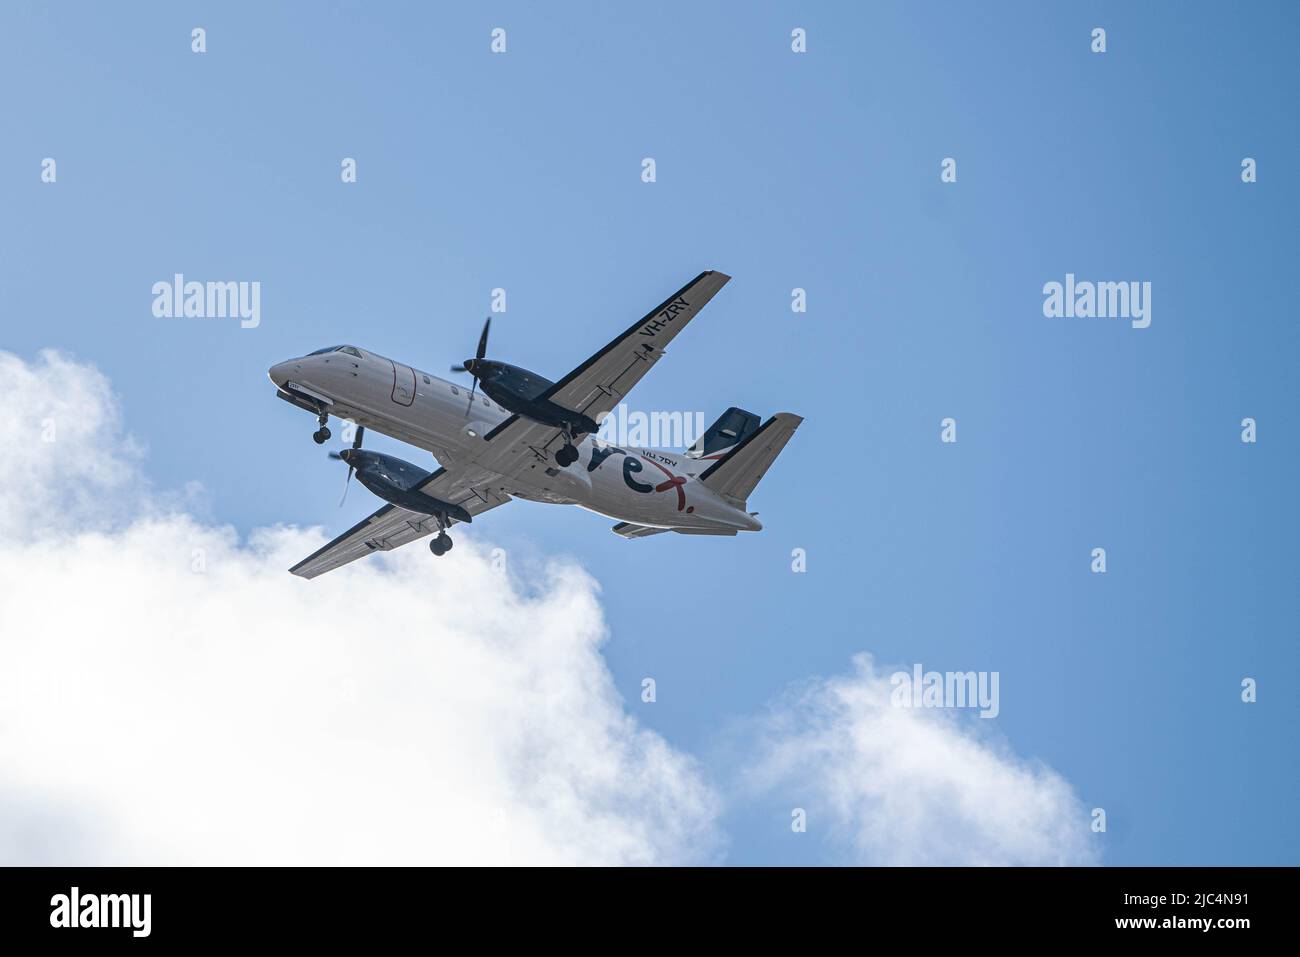 10 June 2022. A Regional Express Airlines (REX) Saab 340B commuter aircraft VH-RXN on approach to Adelaide International Airport, Adelaide, Australia Stock Photo